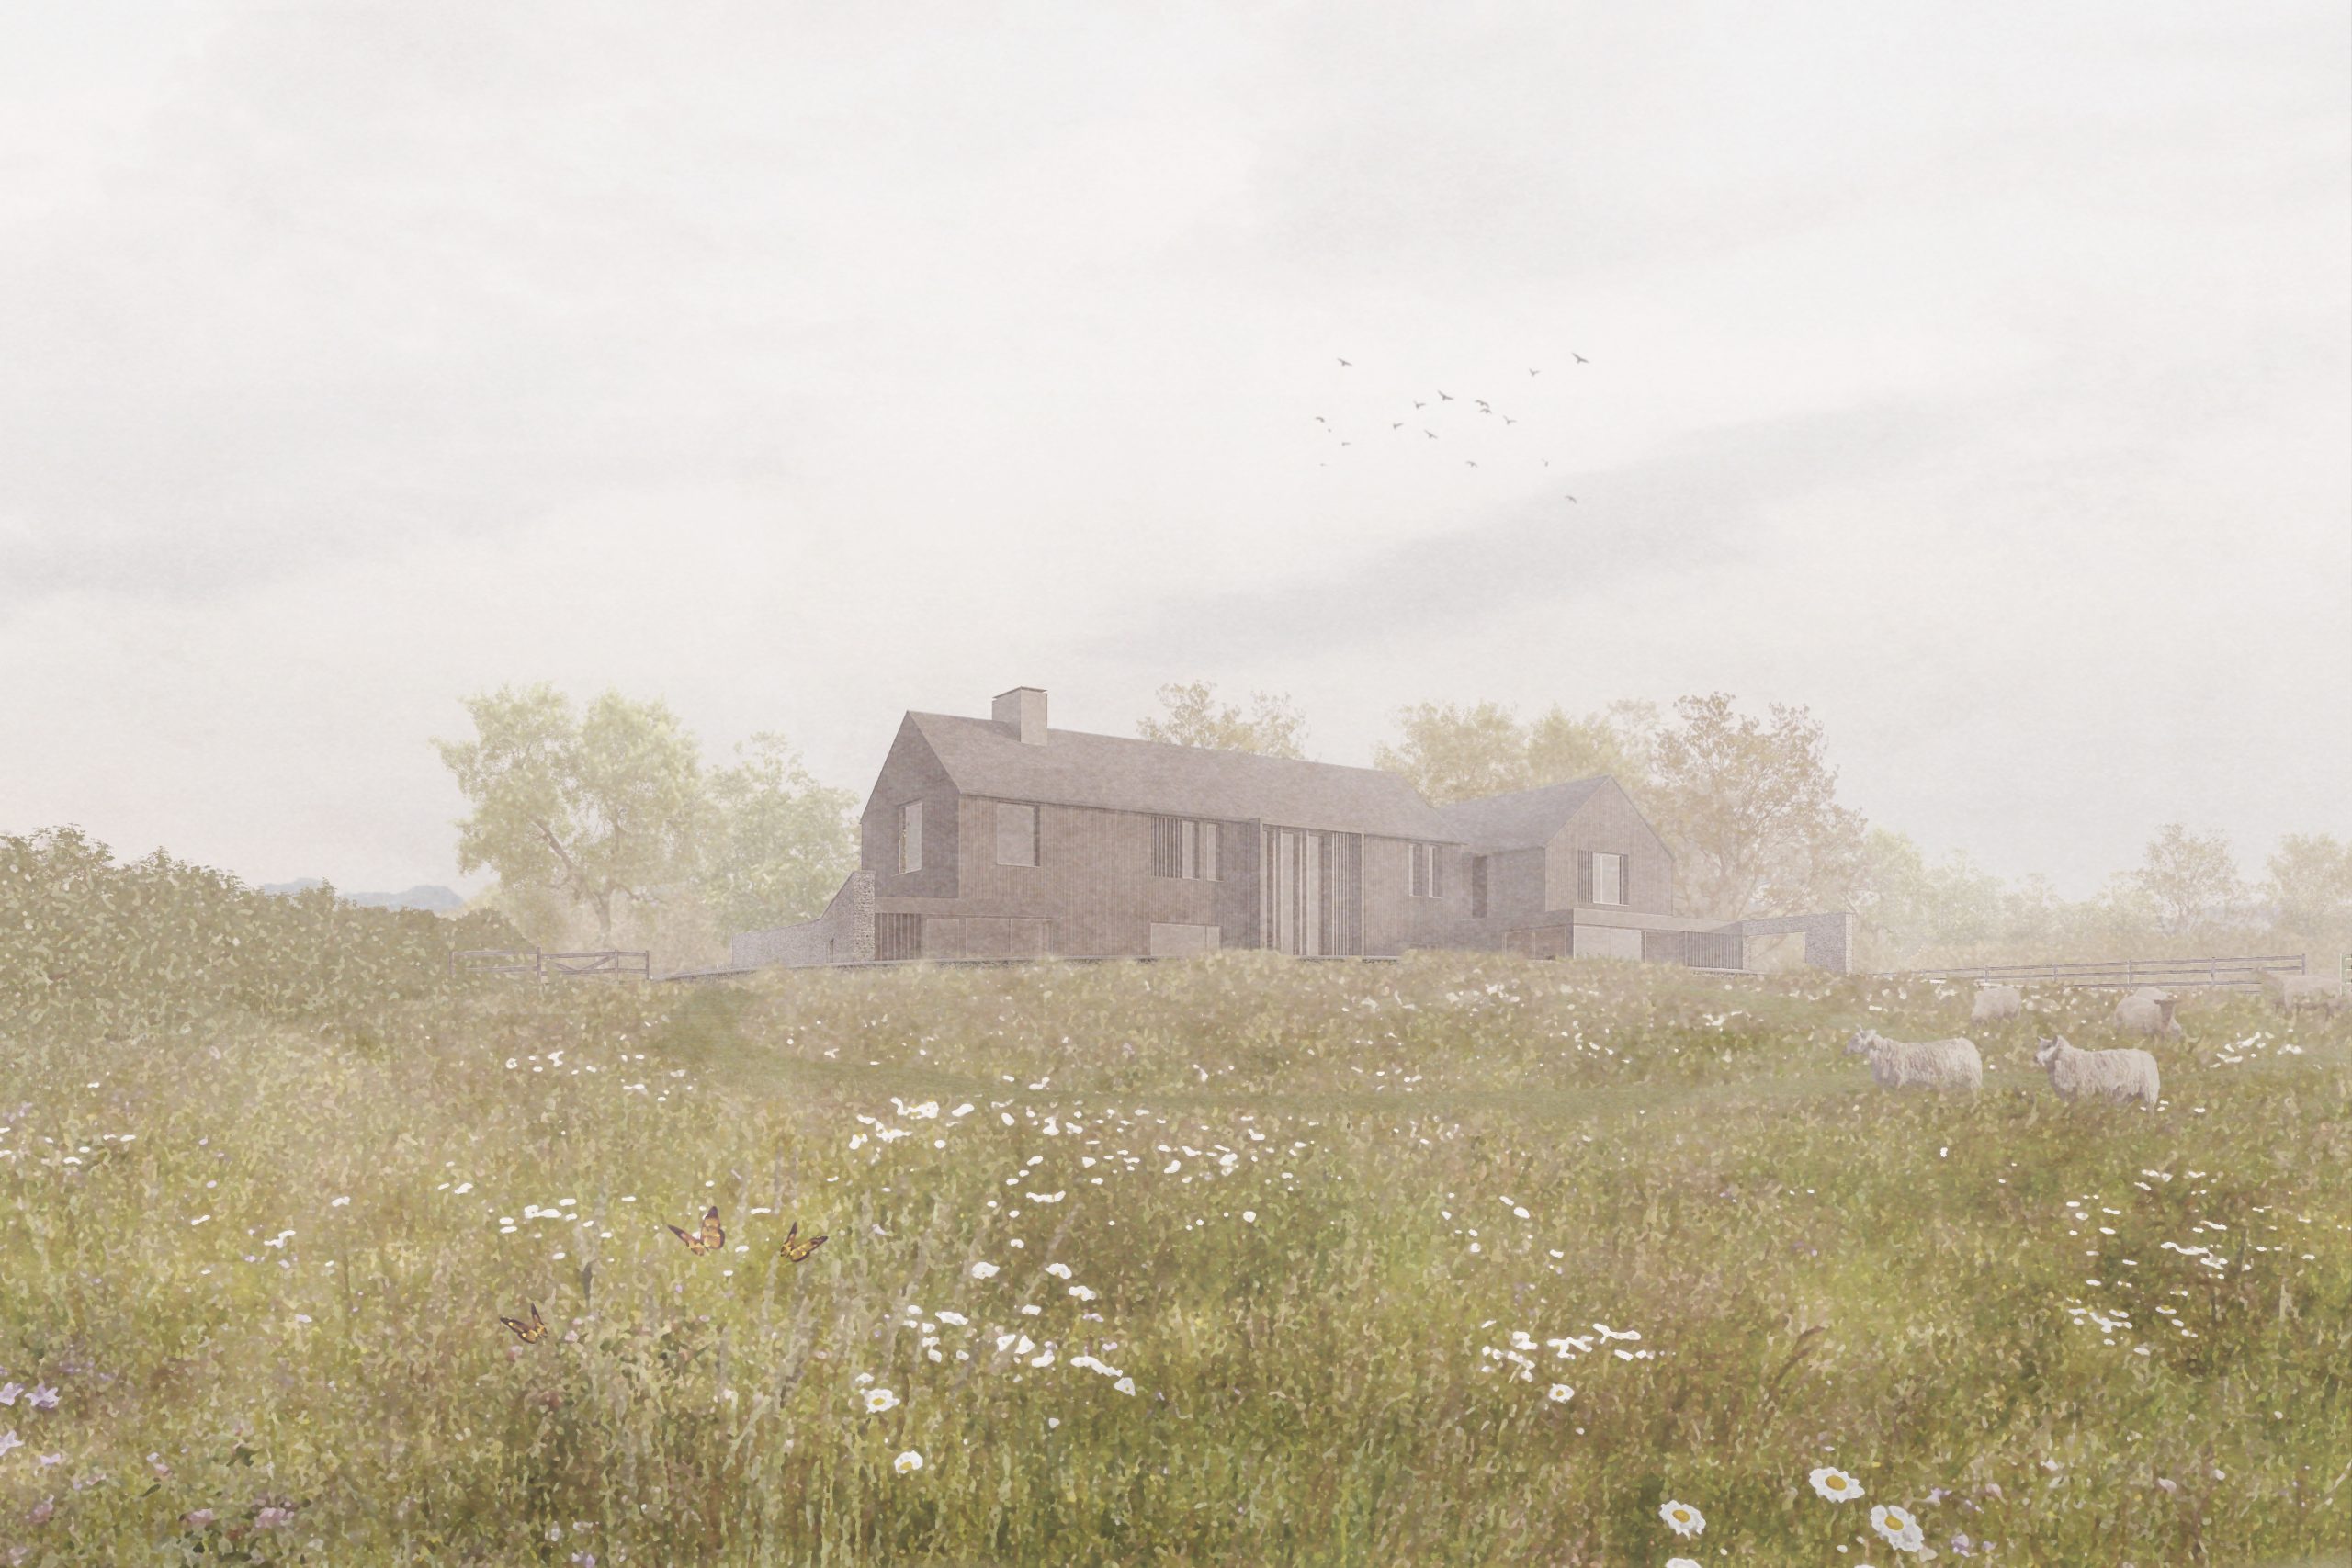 Planning submitted for new house in the South Downs